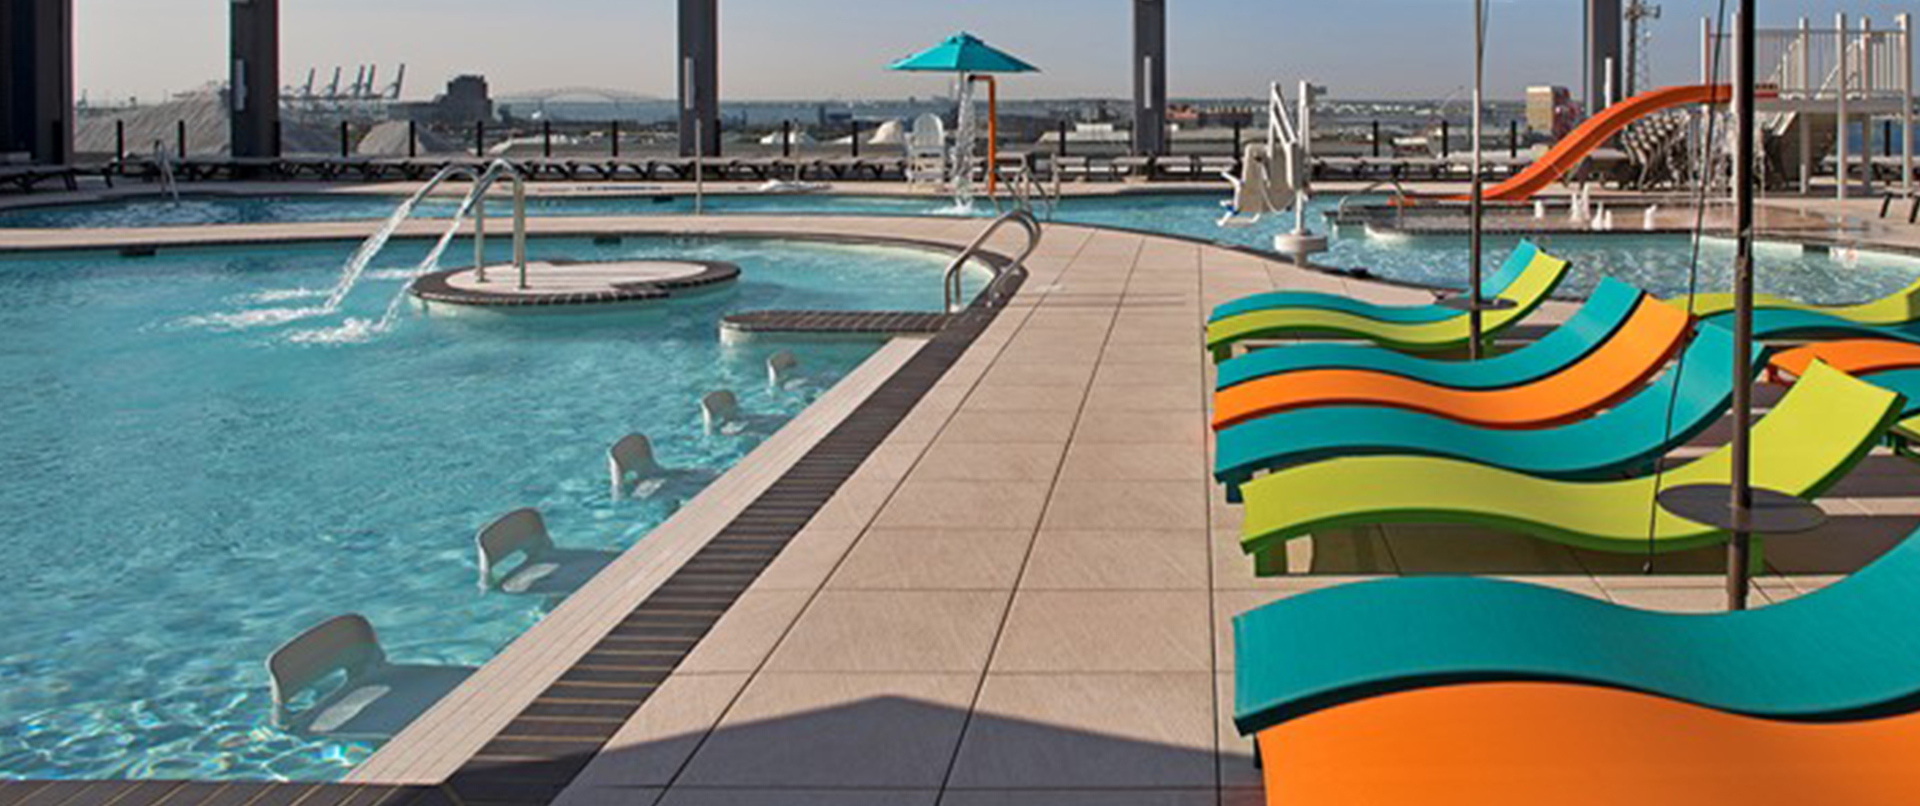 Rooftop Swimming Area with Bright Decor